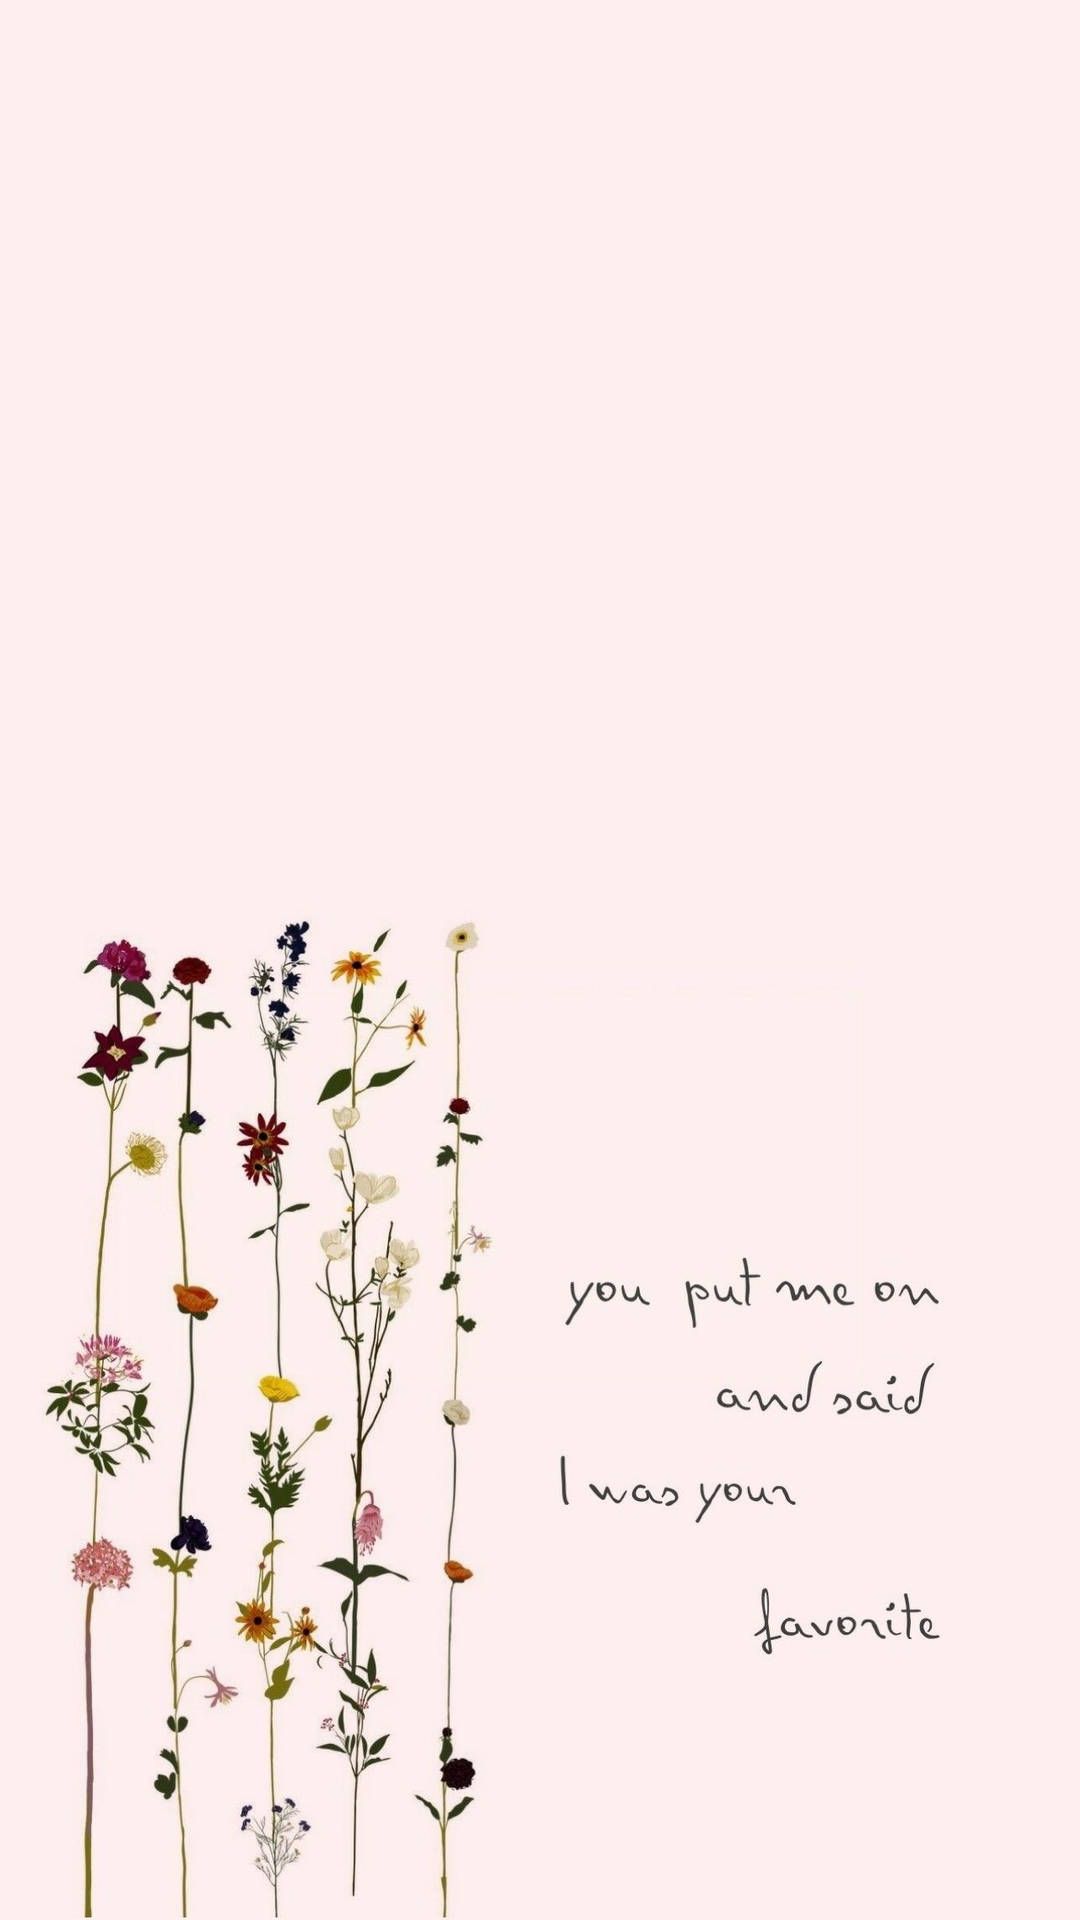 A quote from the book of flowers - Taylor Swift